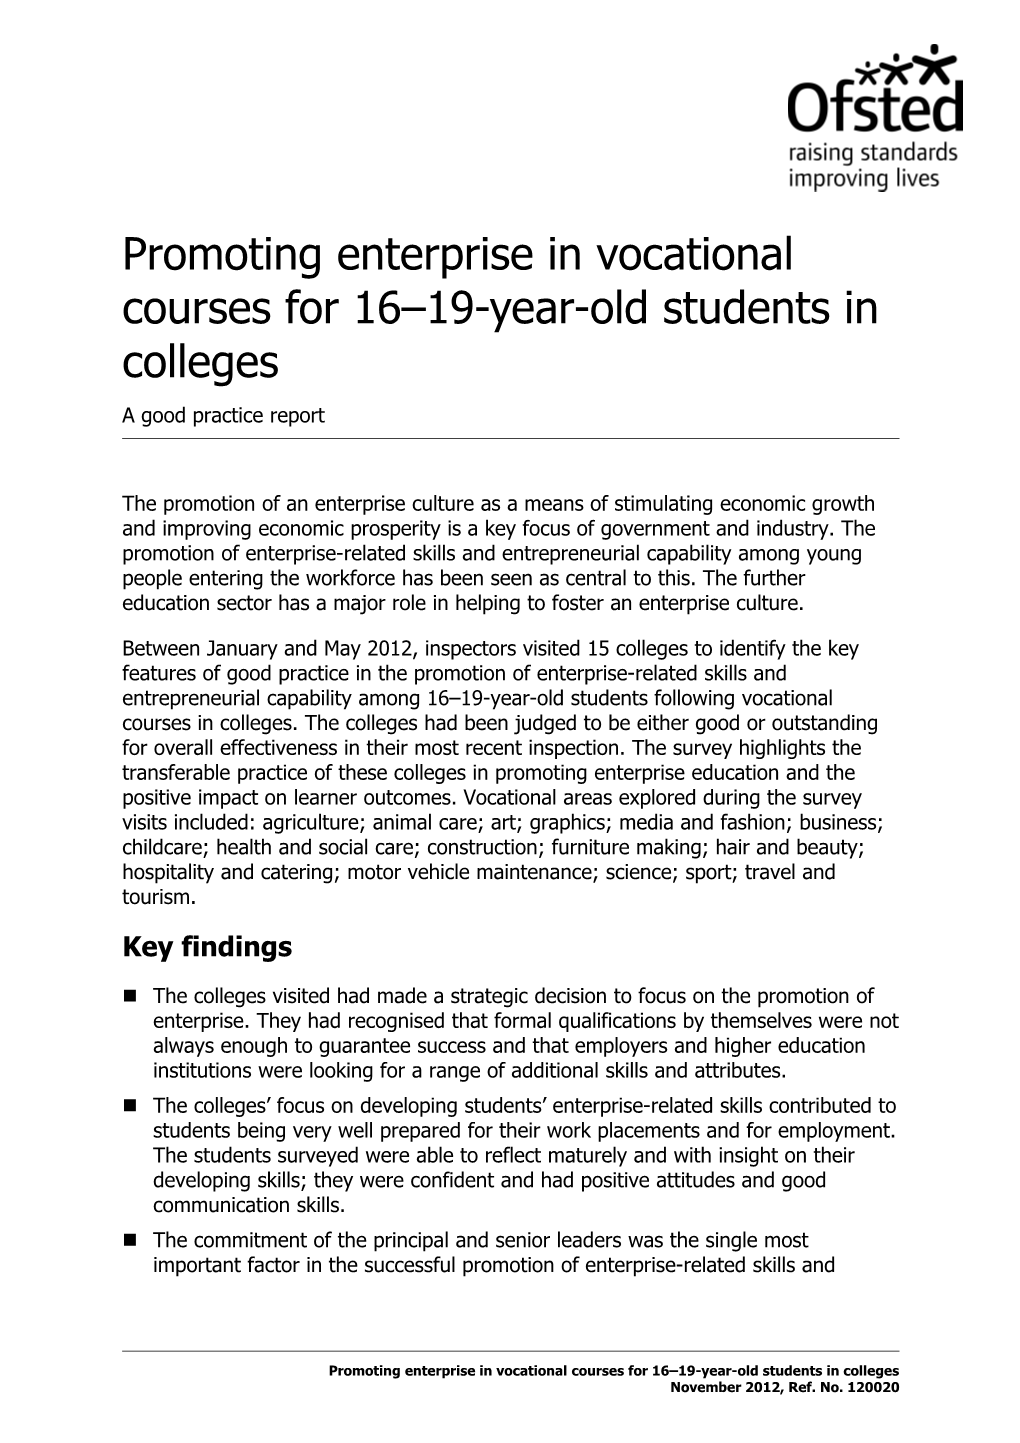 Promoting Enterprise in Vocational Courses for 16 19-Year-Old Students in Colleges